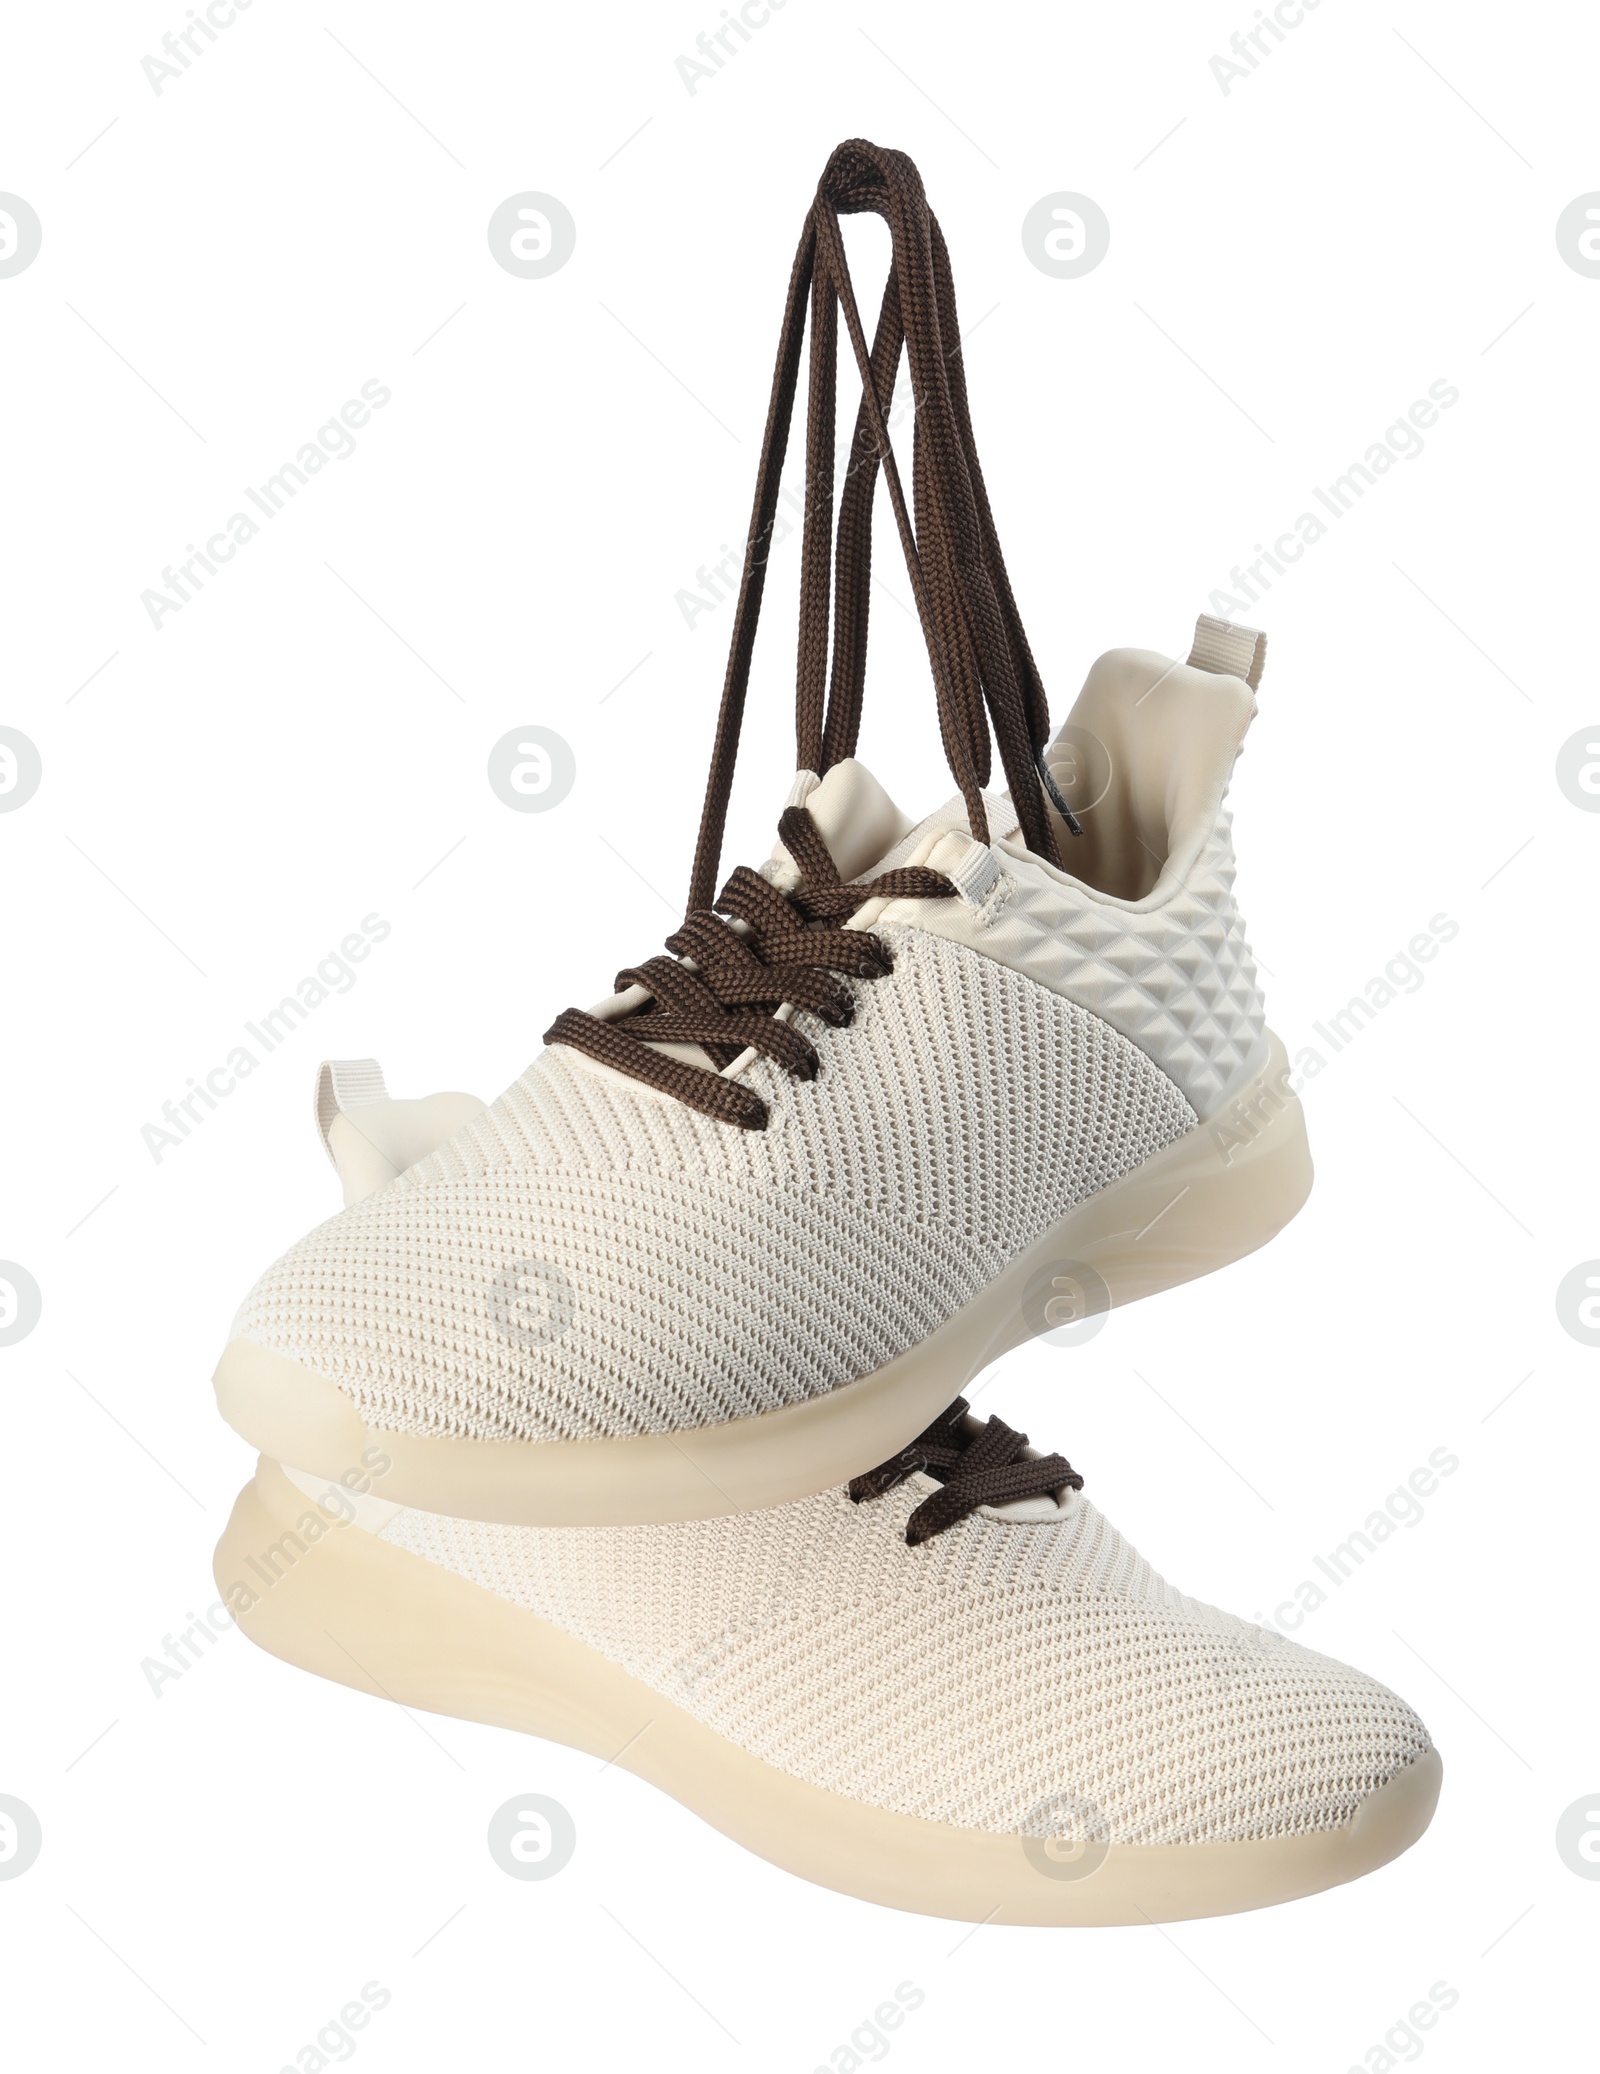 Photo of Pair of stylish shoes with laces hanging on white background